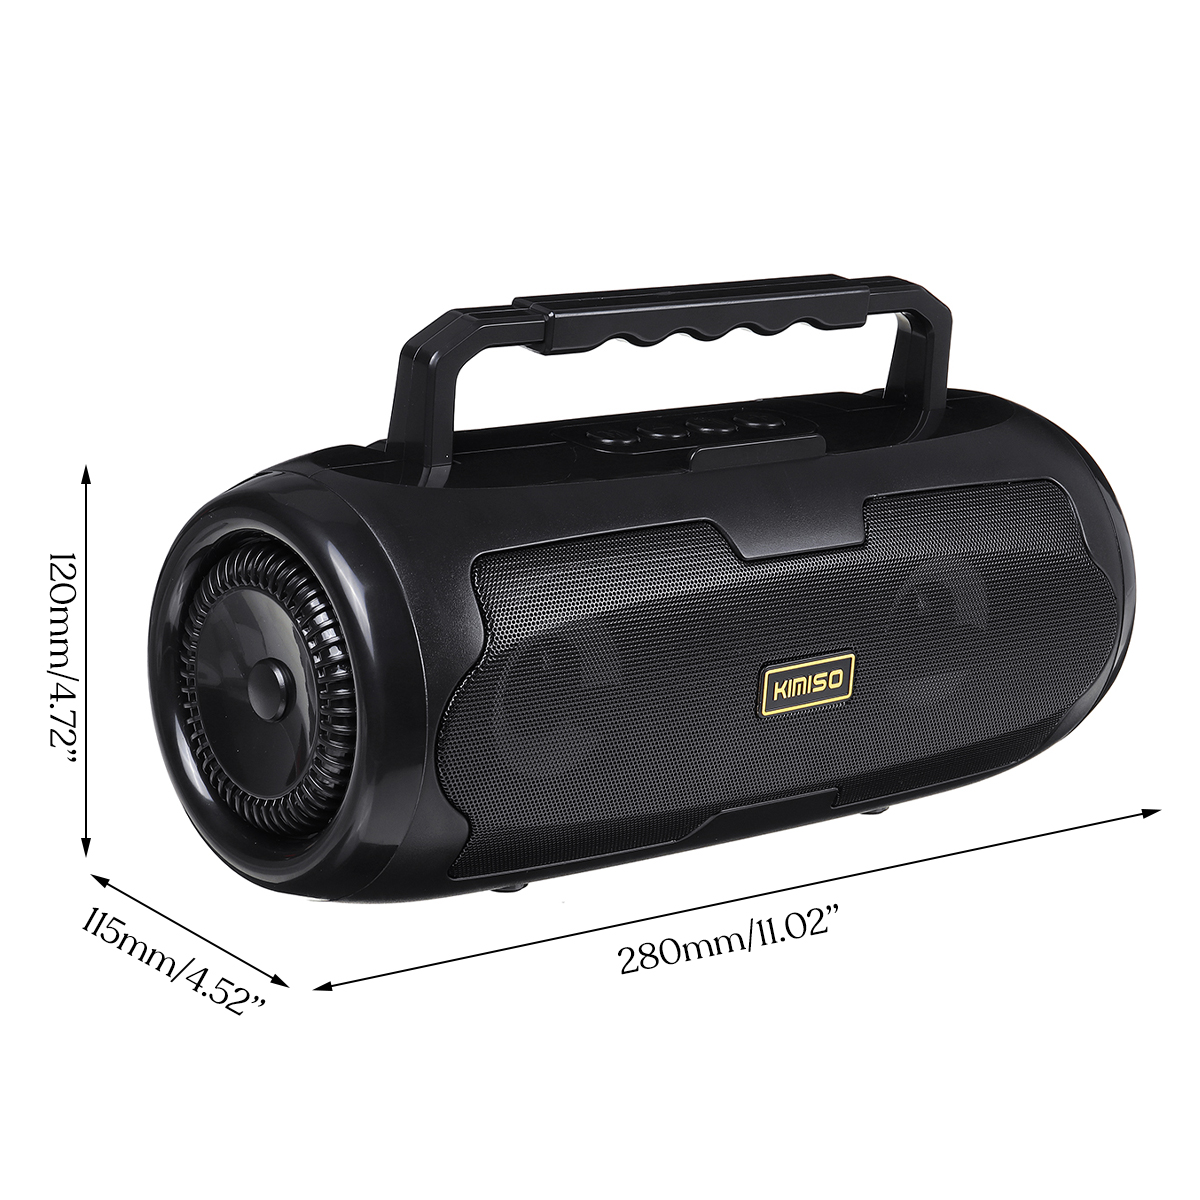 10W-Wireless-bluetooth-Speaker-LED-Portable-Amplifier-Subwoofer-Boombox-FM-Radio-TF-Card-USB-Outdoor-1931993-7